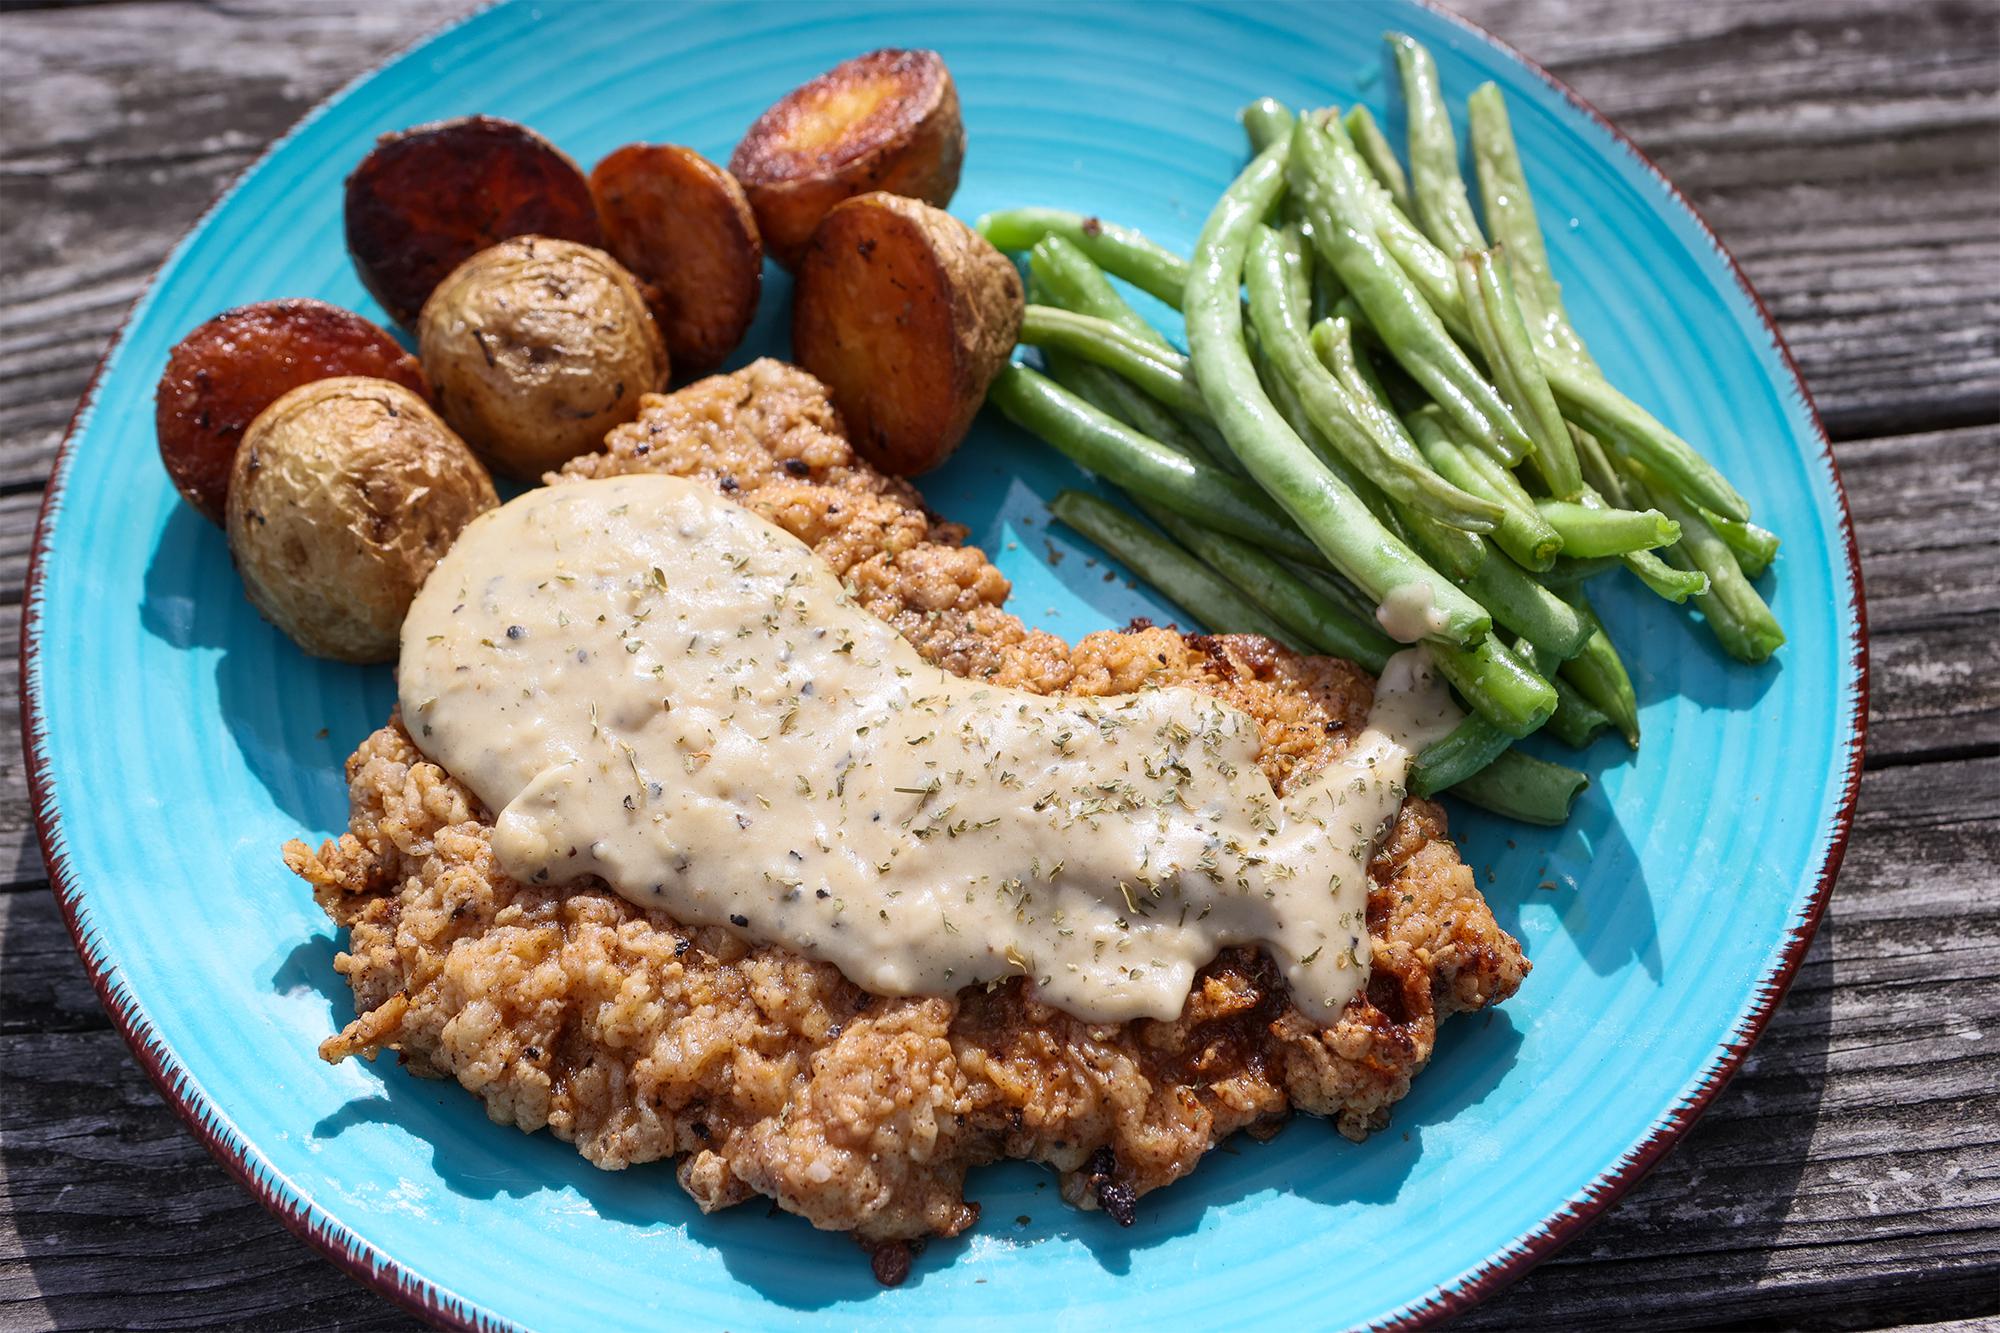 How to make the best chicken-fried steak at home